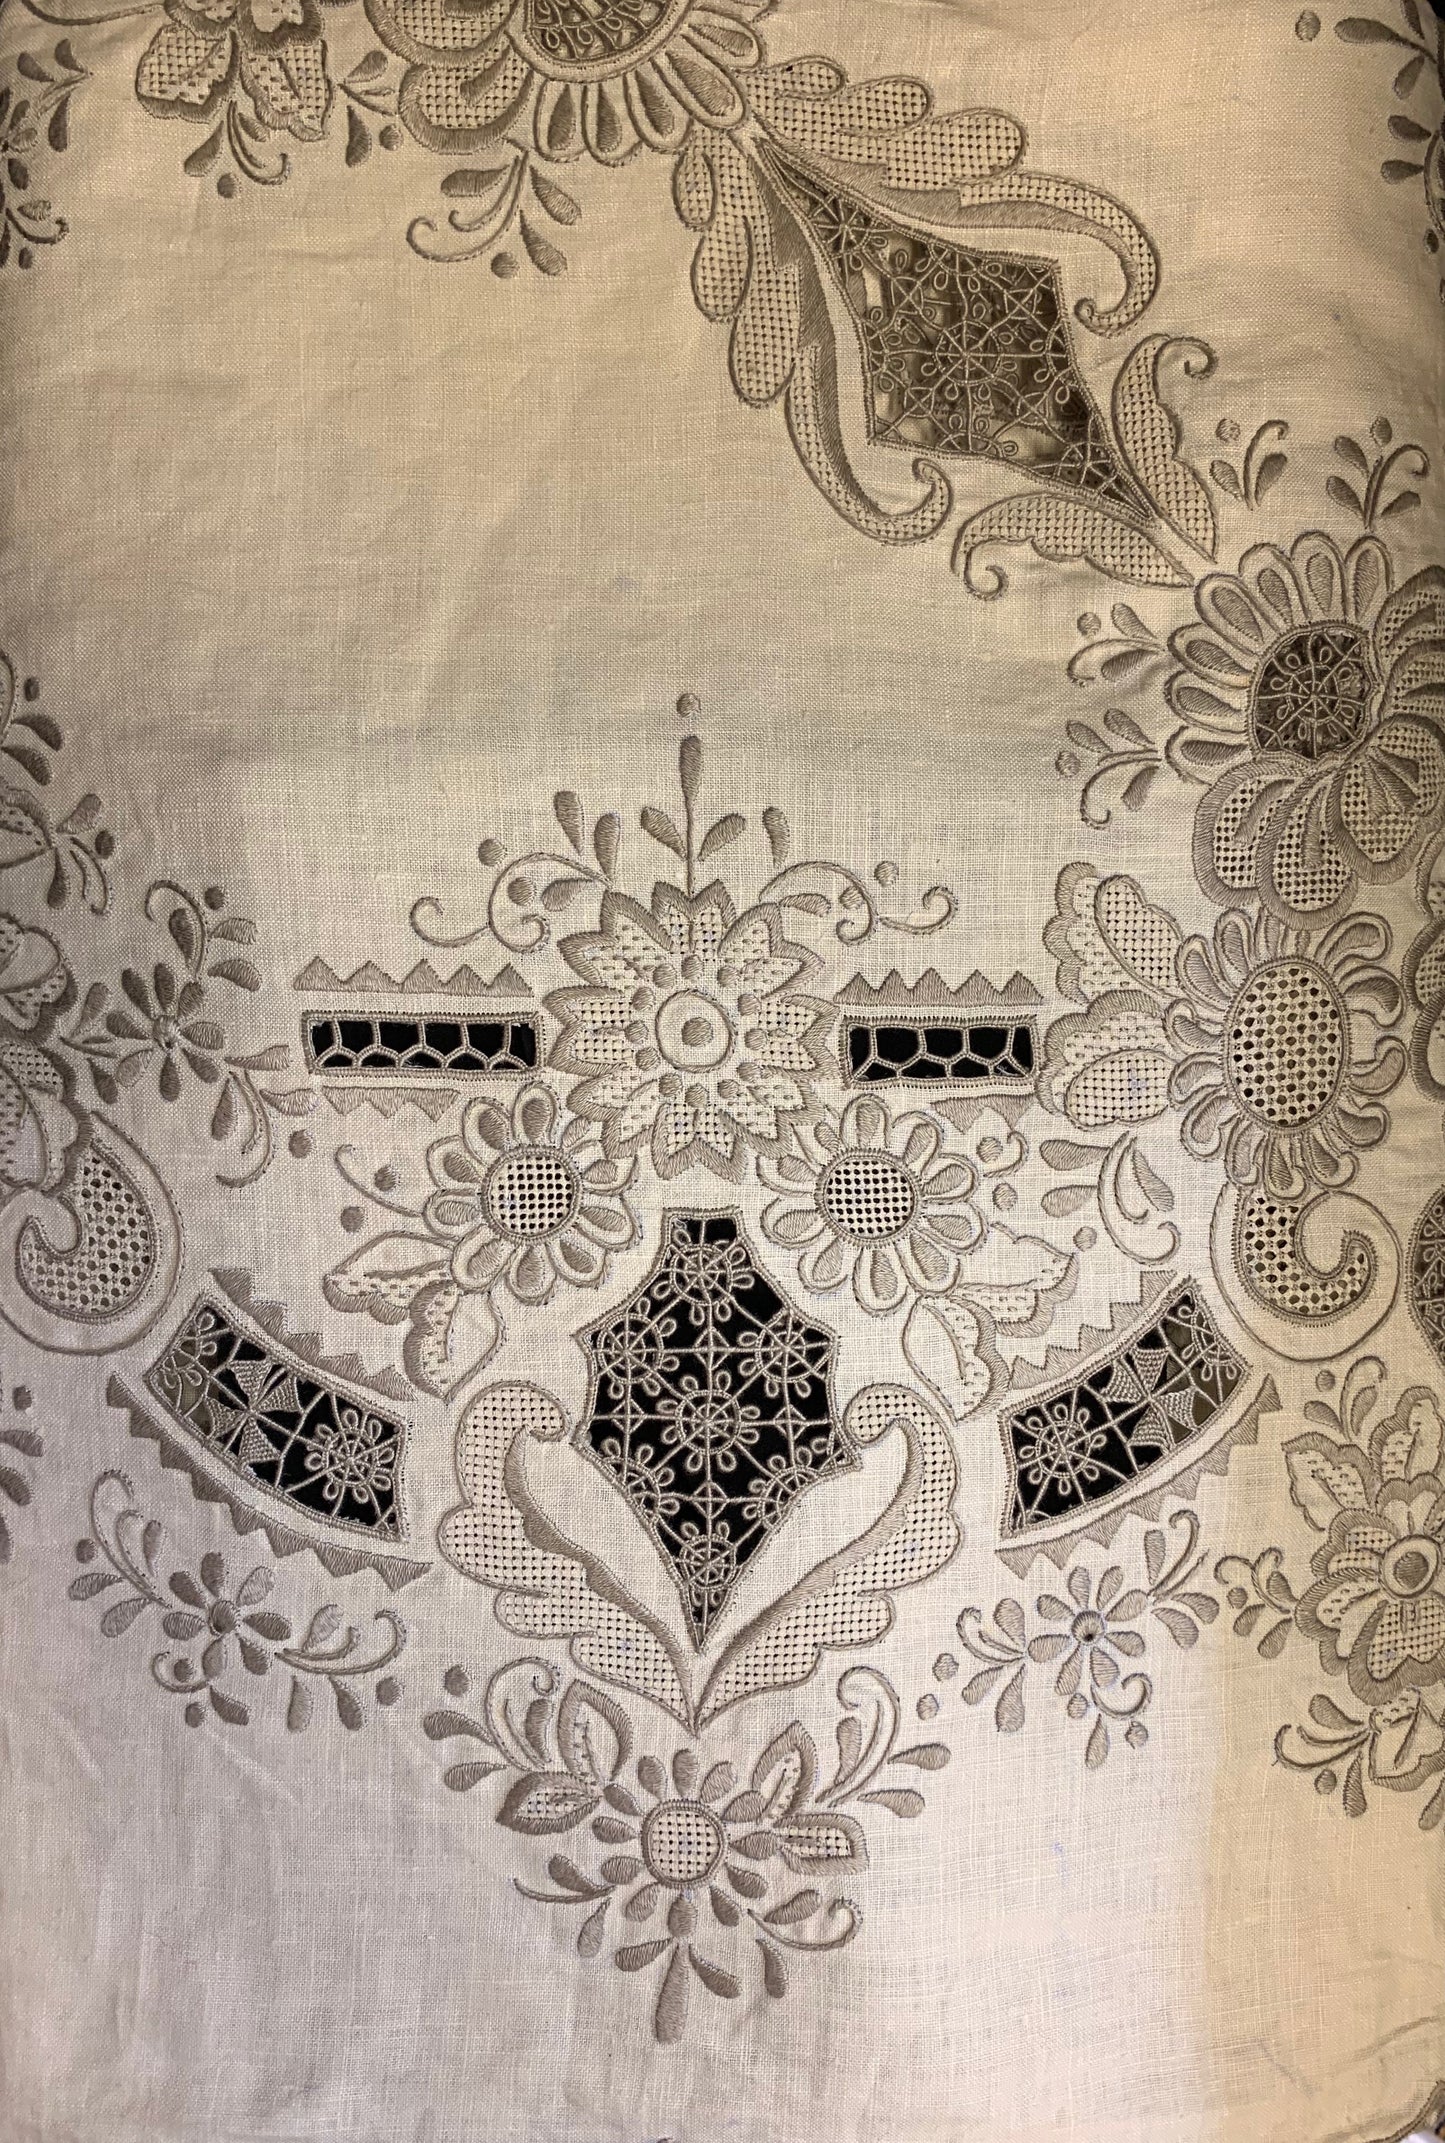 Hand-Embroidered Linen Tablecloth Set